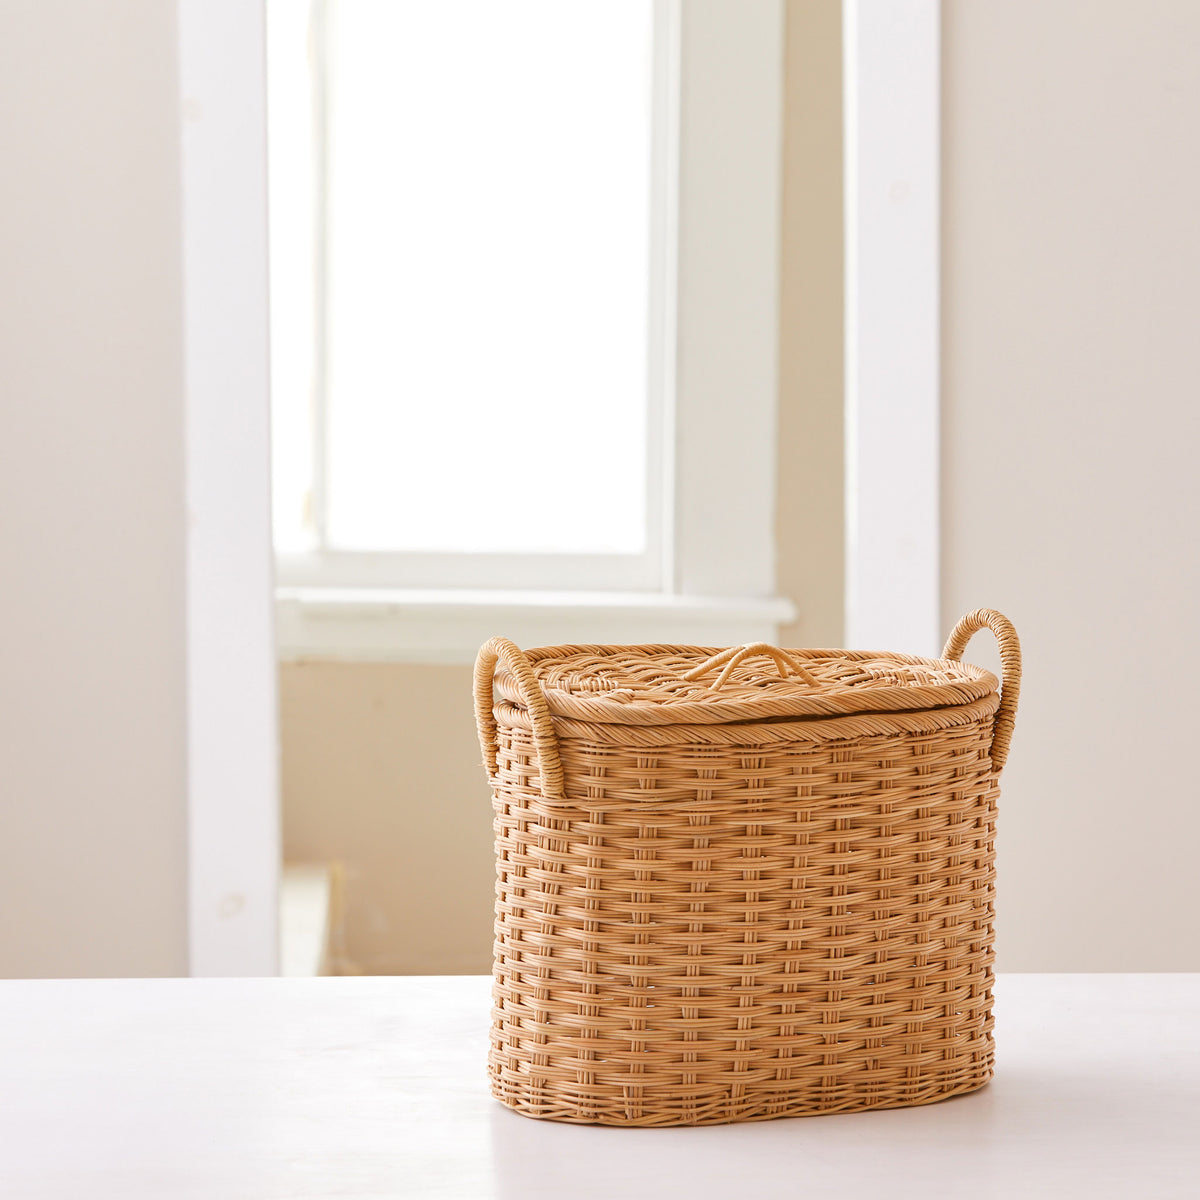 Oval rattan storage basket. Unique storage baskets with lids and handles. 5 sizes. Extra Small basket shown. Great basket for storage. XL, L, M, S, XS.